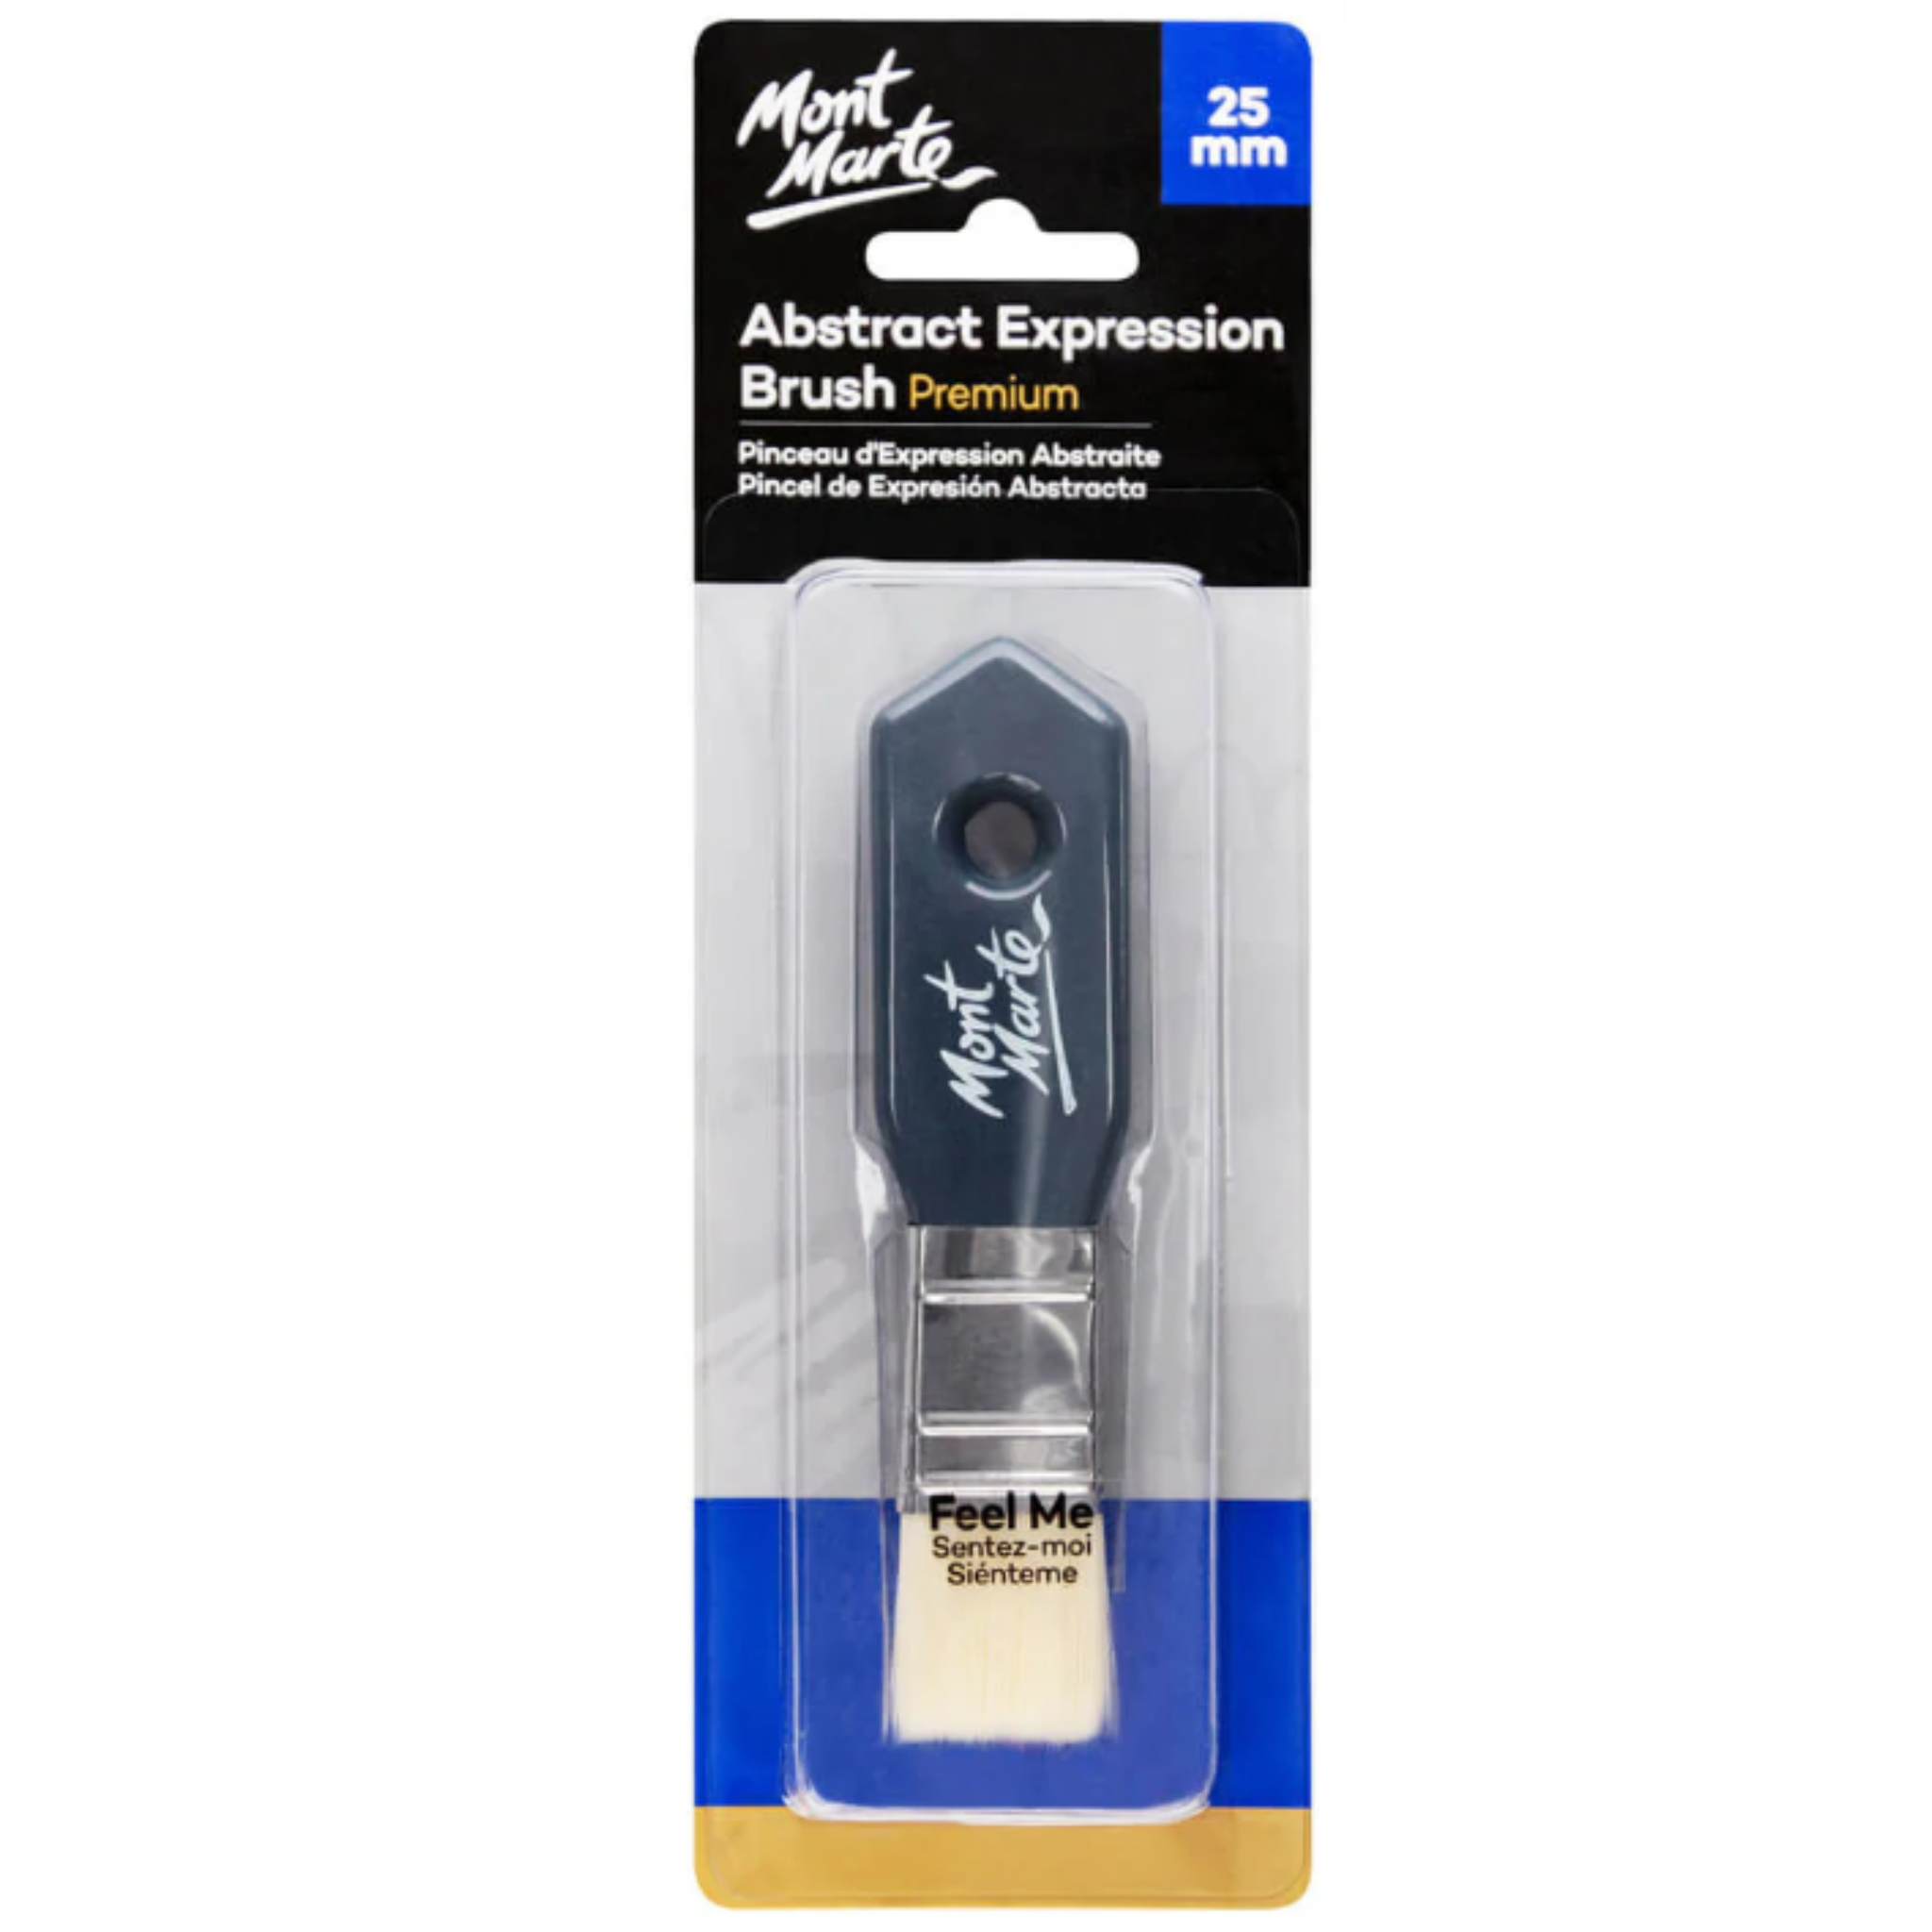 Abstract Expression Brush Premium - 25mm